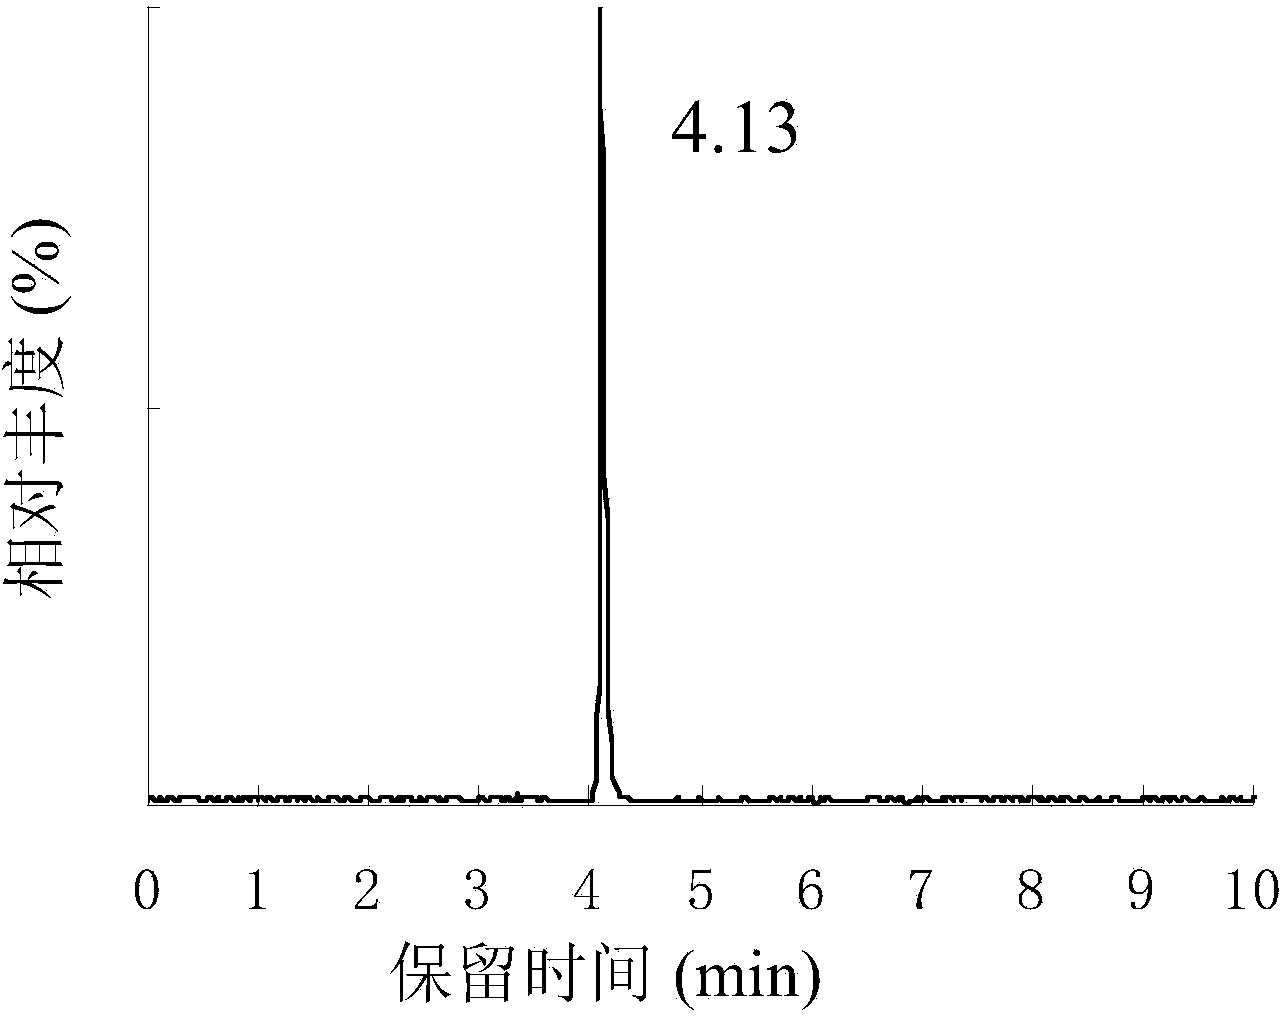 Method for utilizing liquid chromatography tandem mass spectrometry to measure geraniol in flavors and fragrances